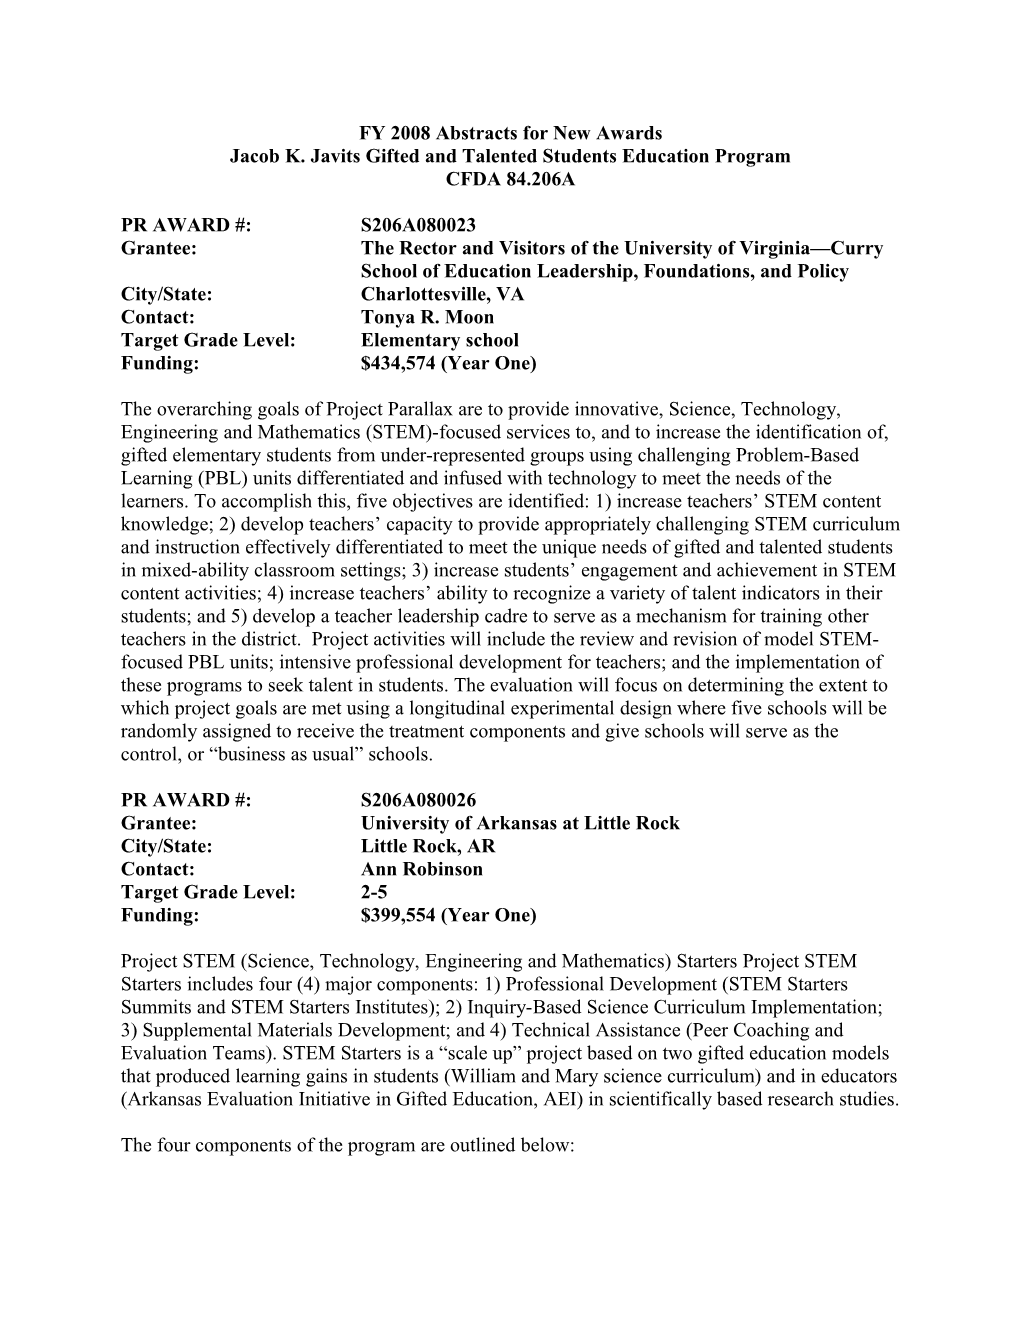 FY 2008 Abstracts for New Awards for Jacob K. Javits Gifted and Talented Students Education